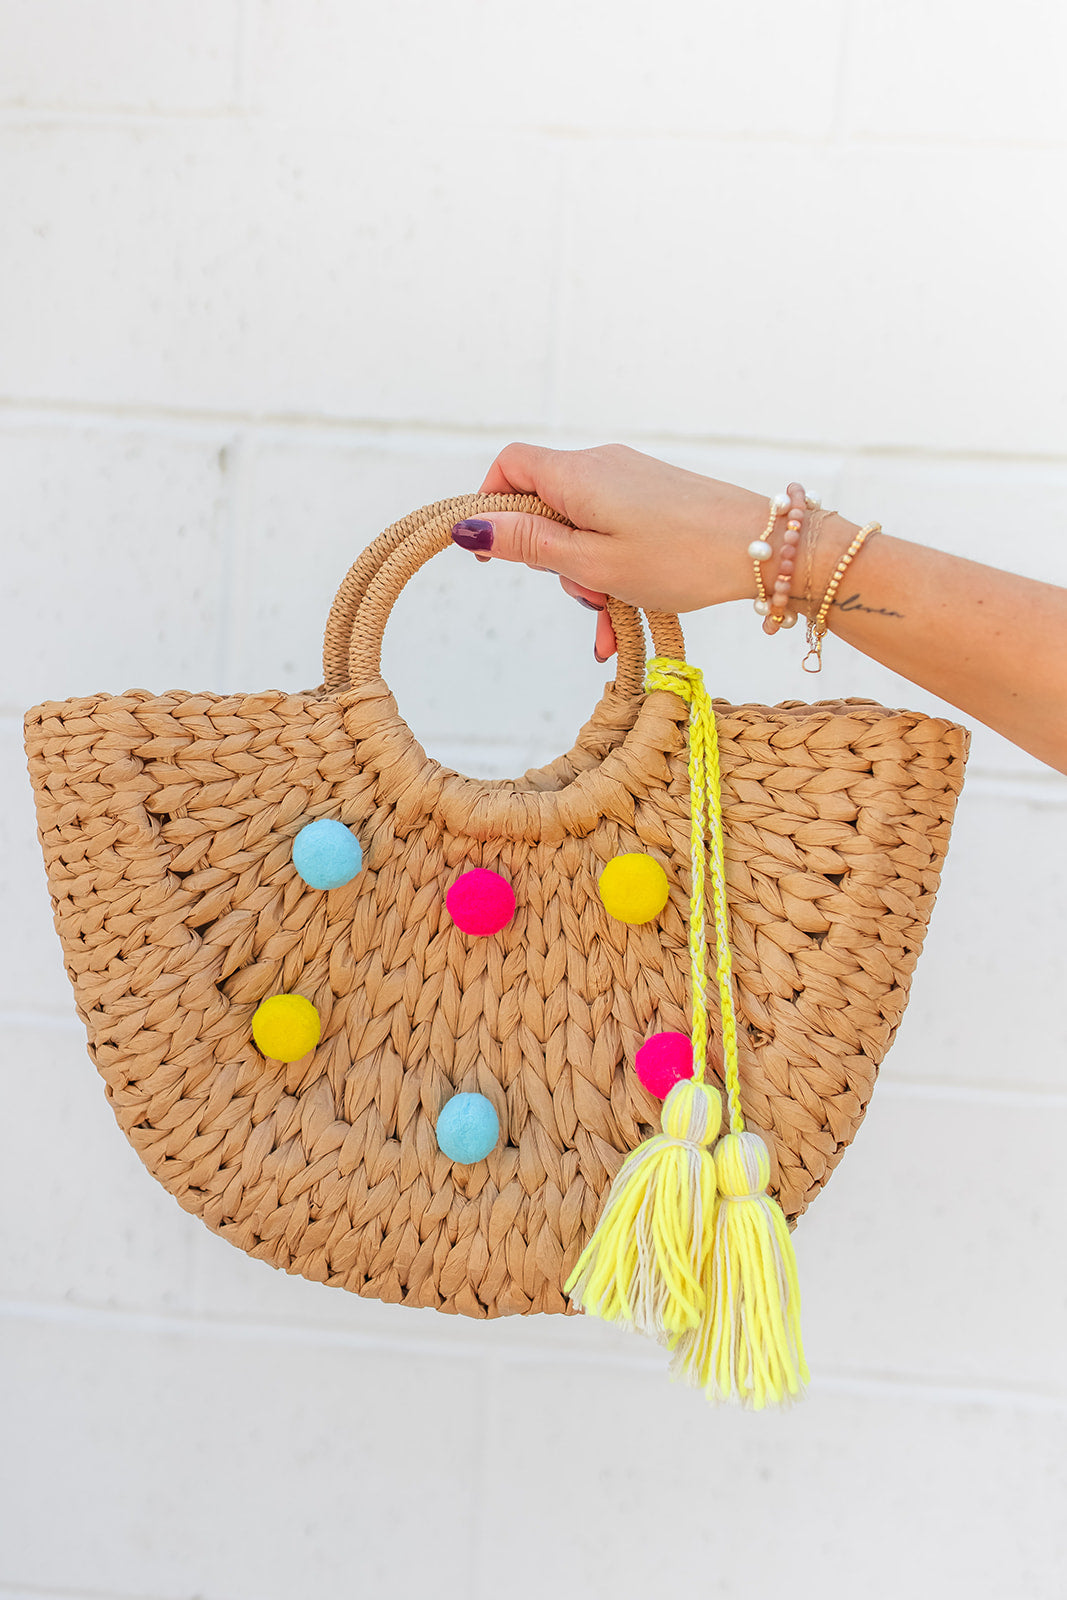 The Woven Straw Pom Bag